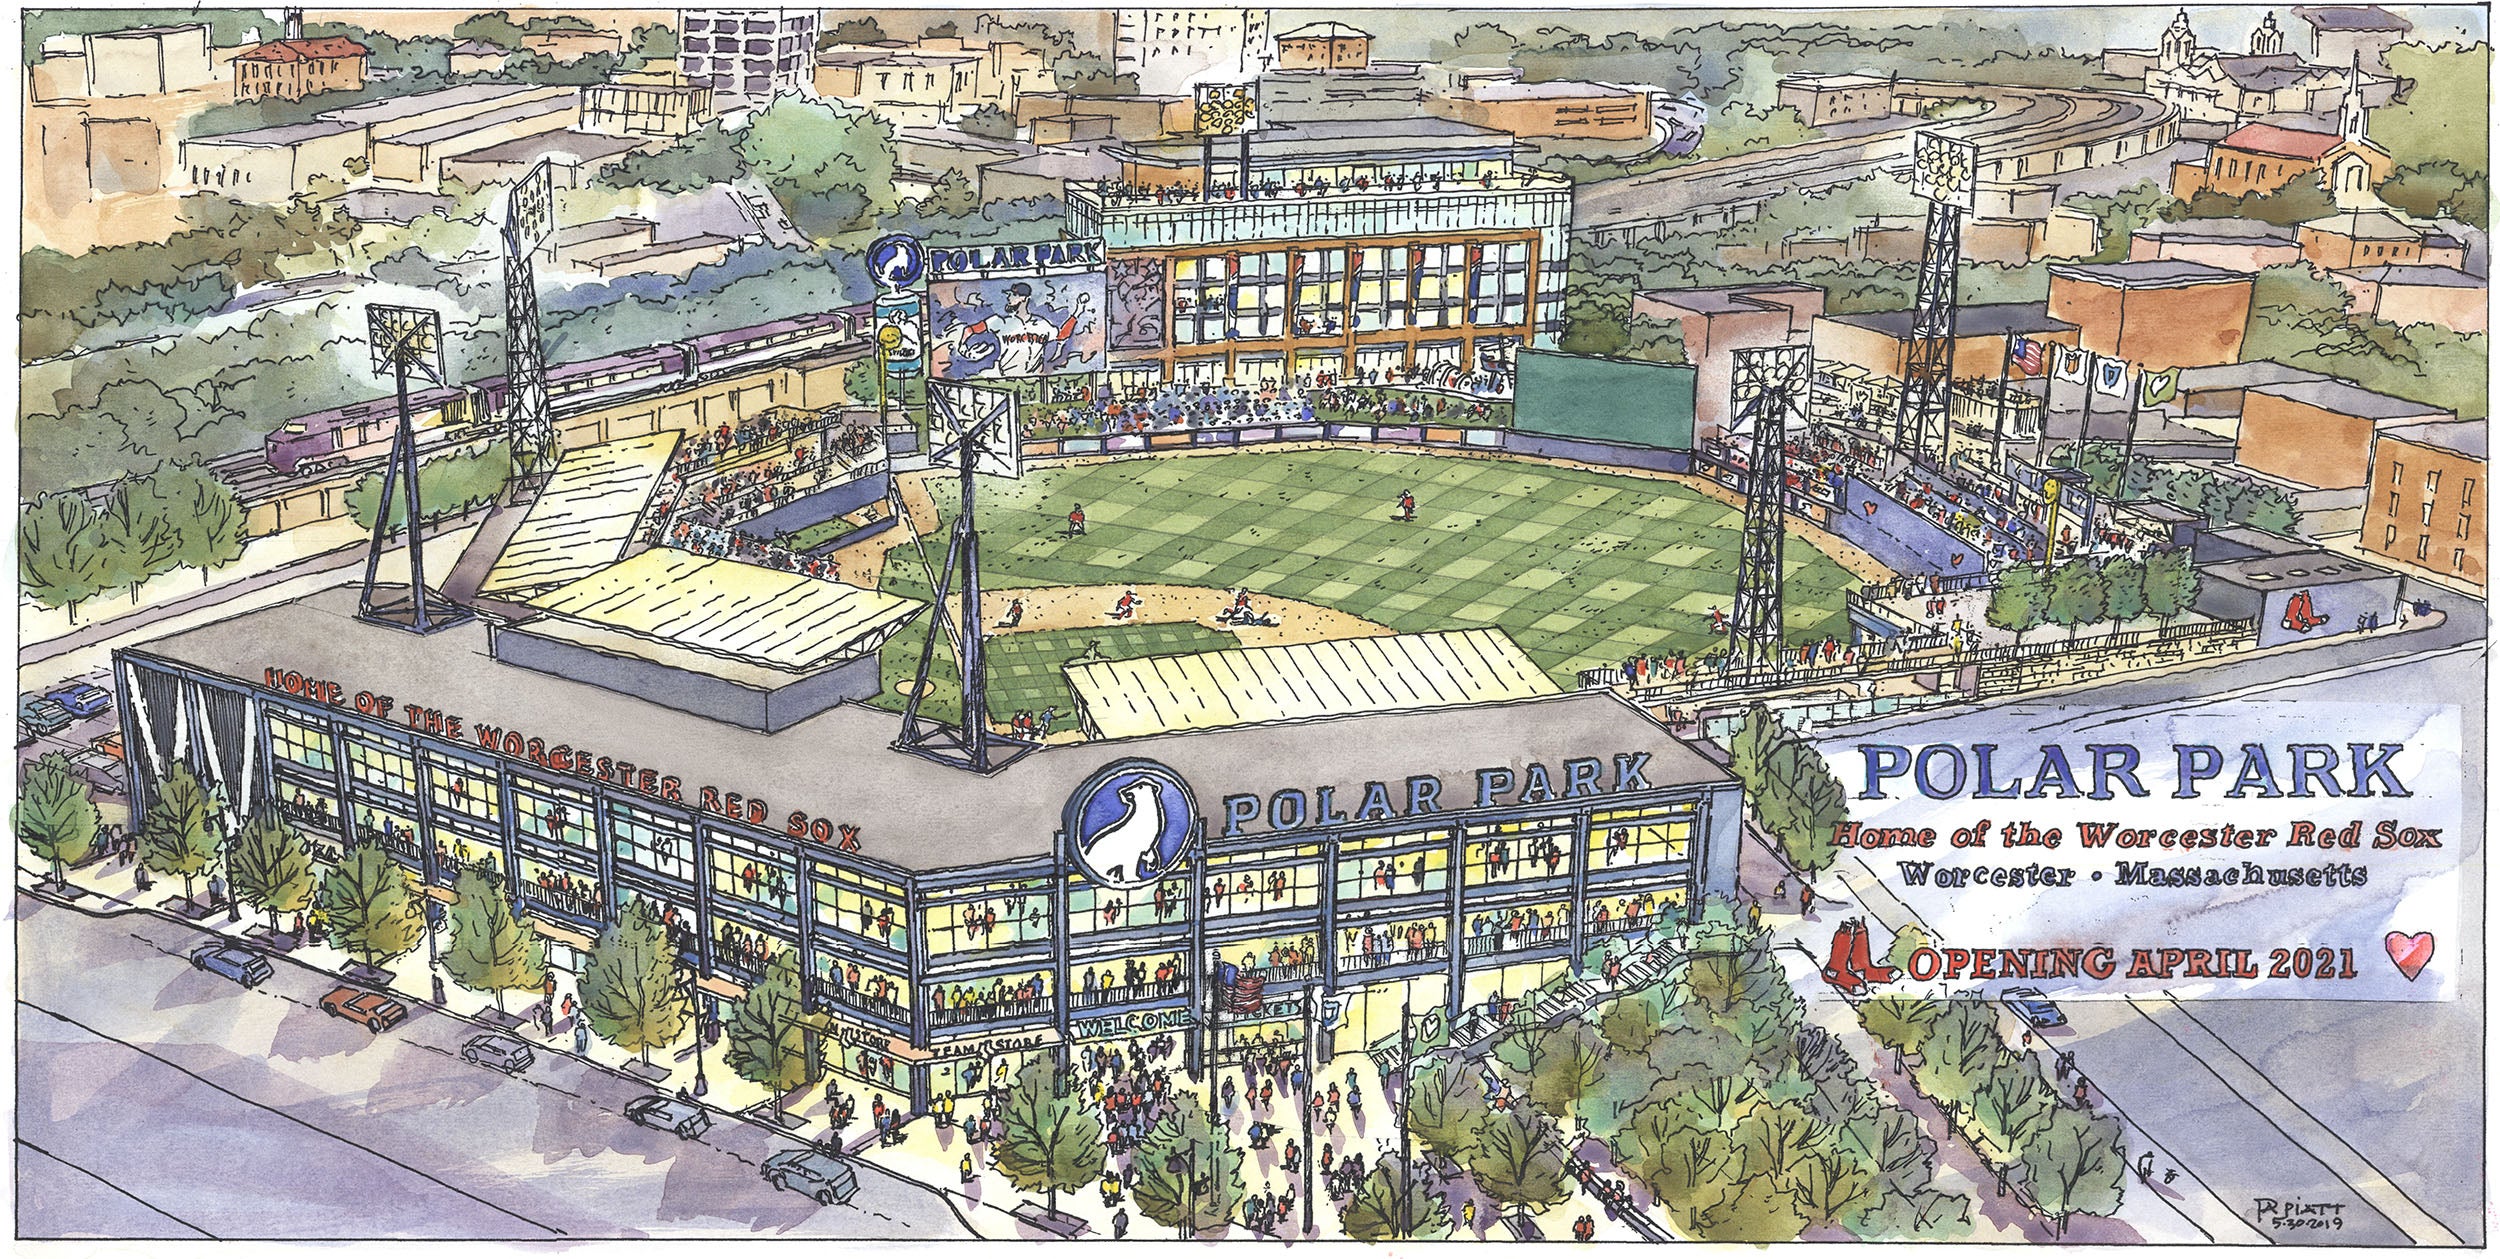 WooSox announce Polar Park upgrades, promotions and Worcester Red Sox  baseball plans in 2022 